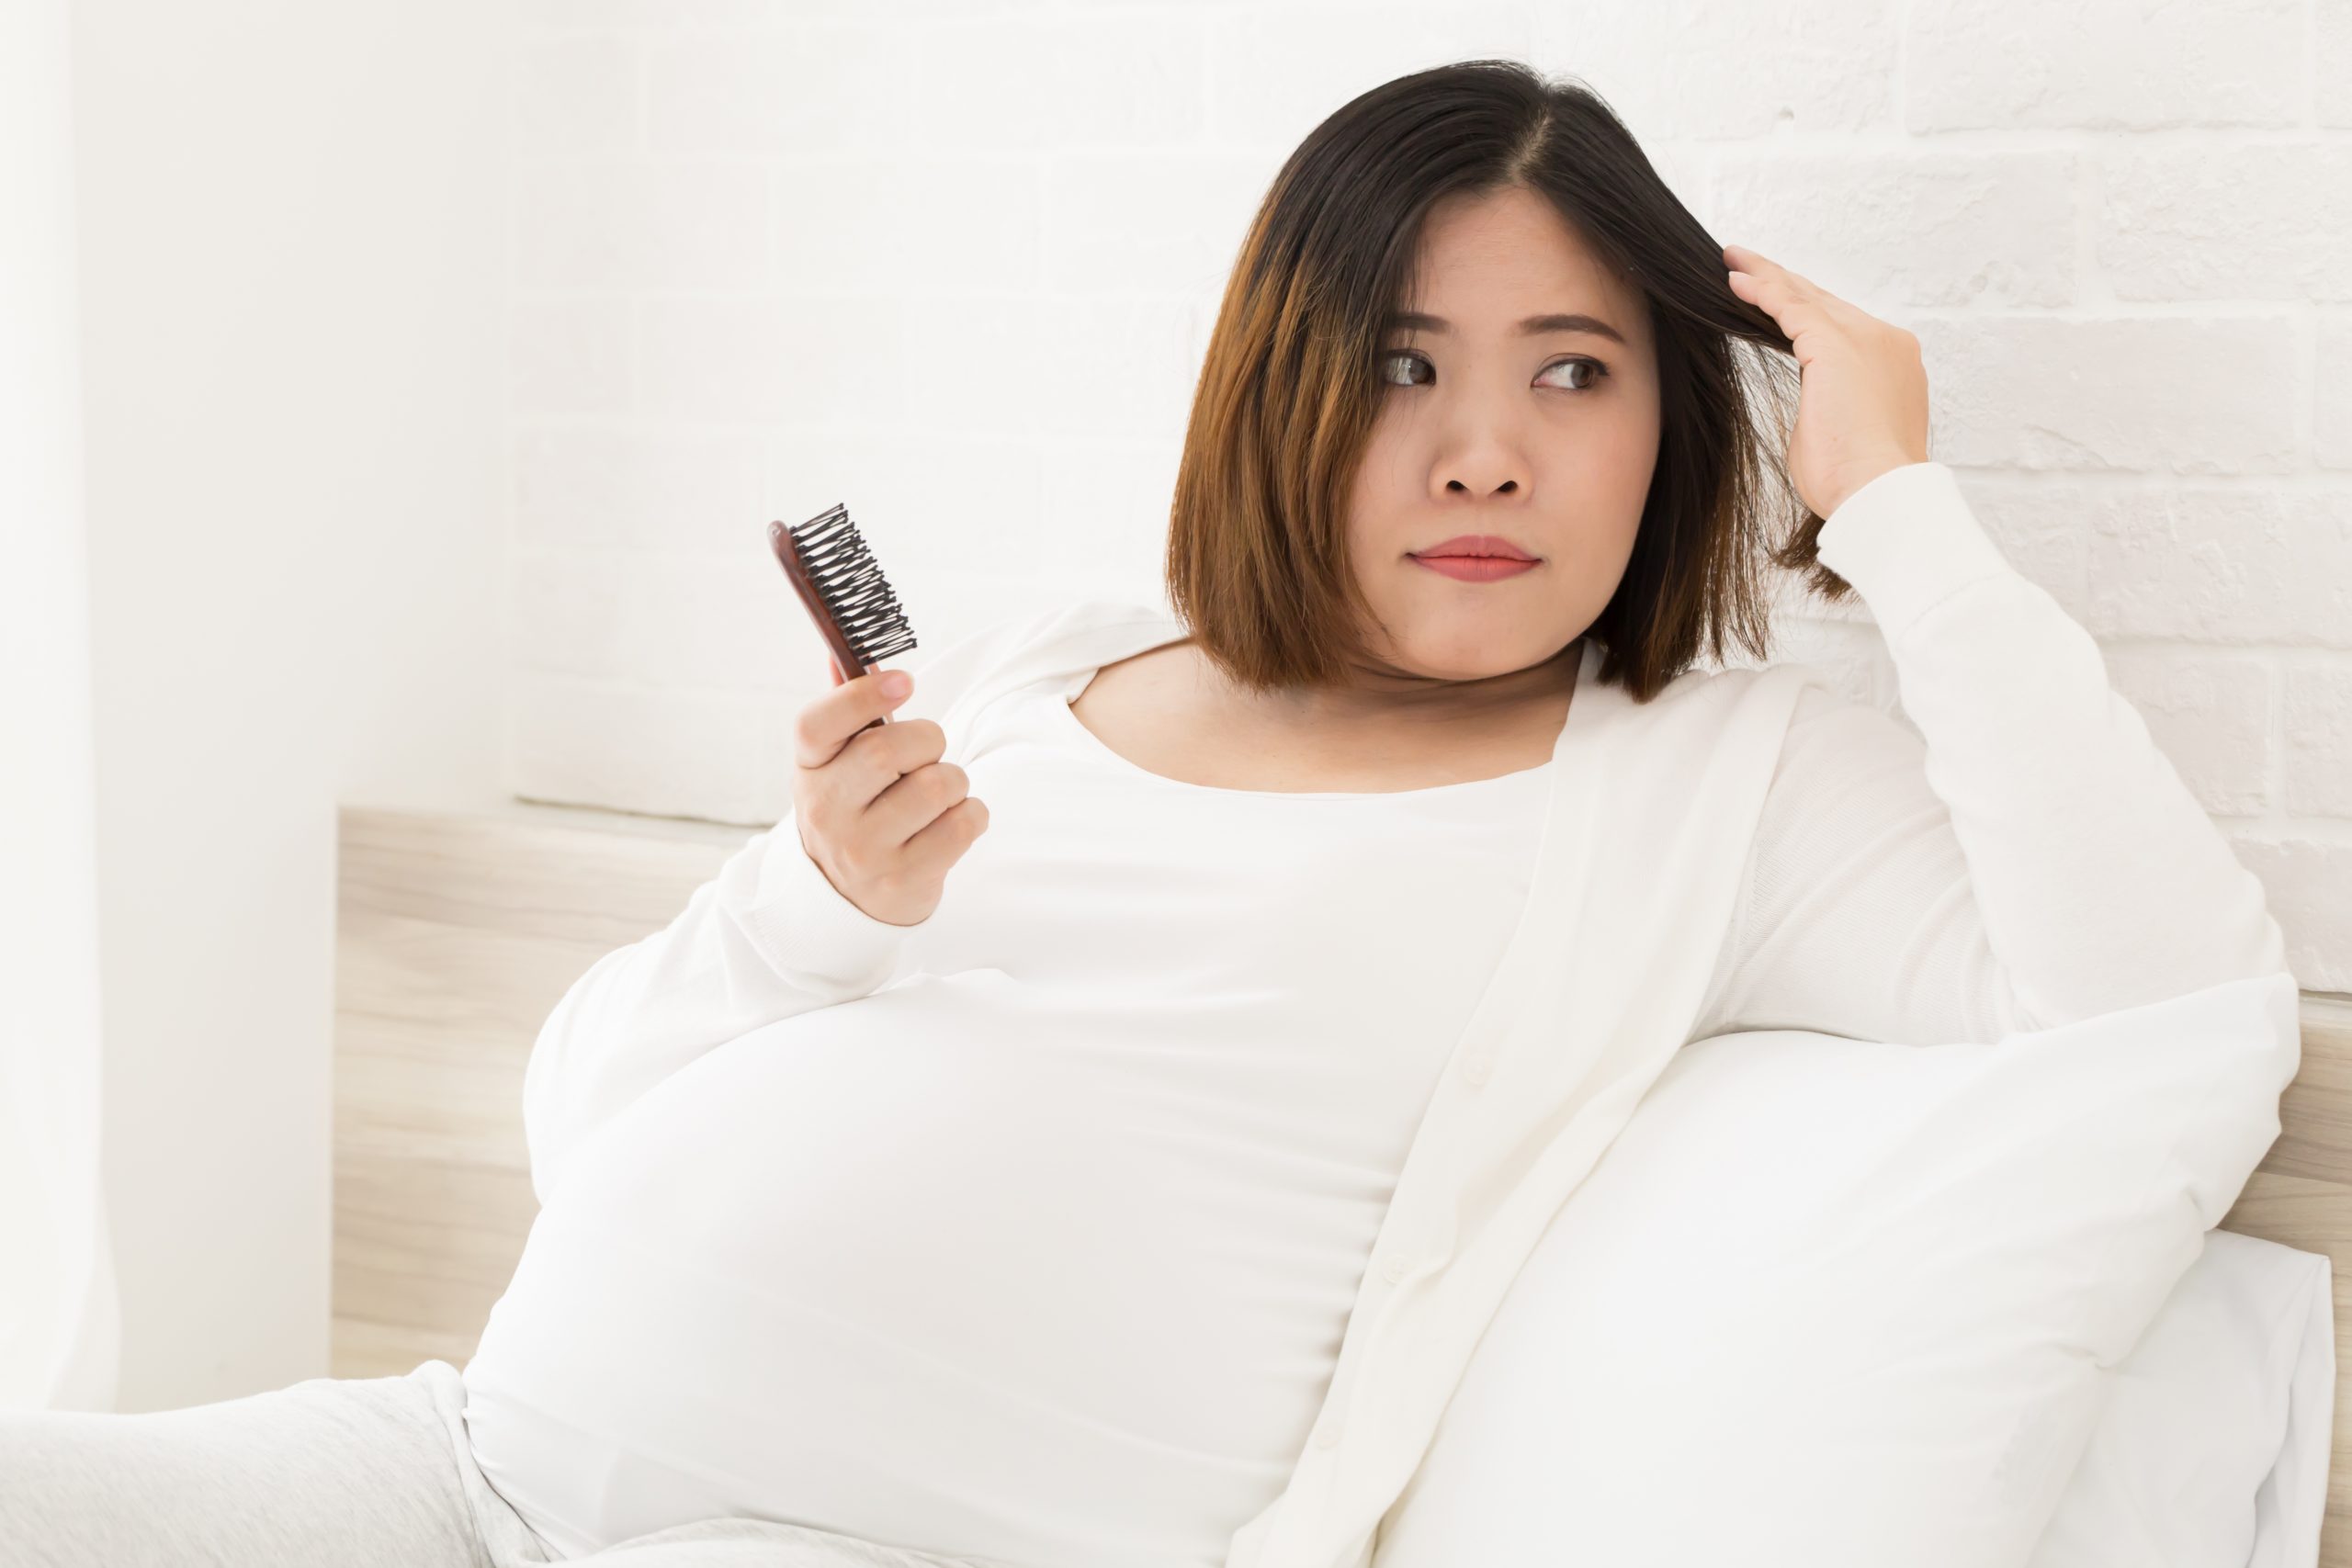 Hair Loss During and After Pregnancy: What Are the Causes?